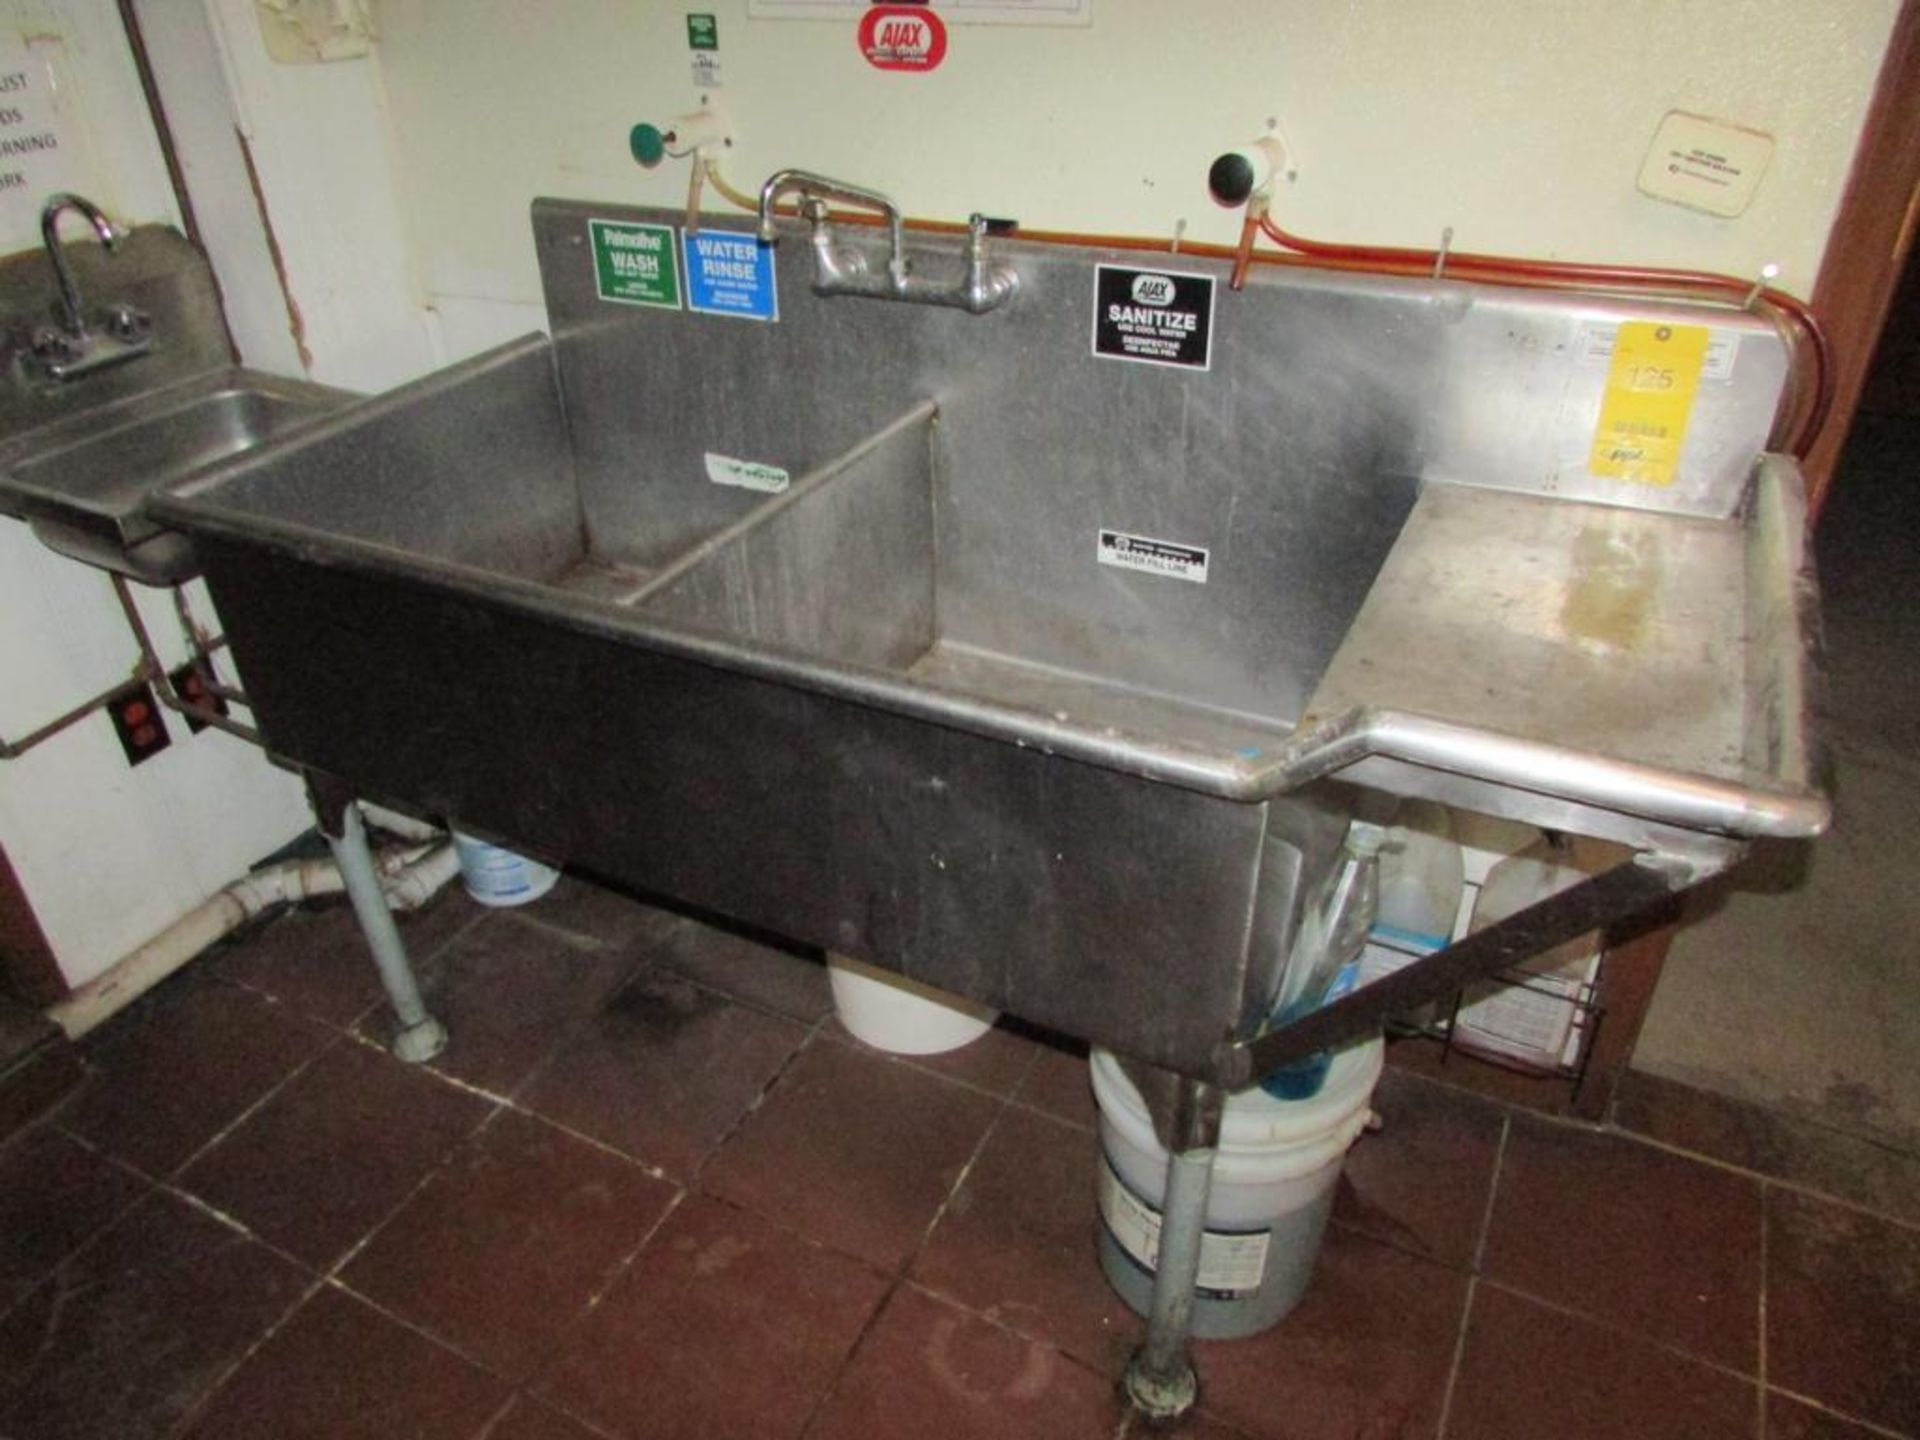 Double Basin Stainless Steel Sink. 24"x24"x14" Wash Basins. With Stainless Steel Hand Sink - Image 2 of 4